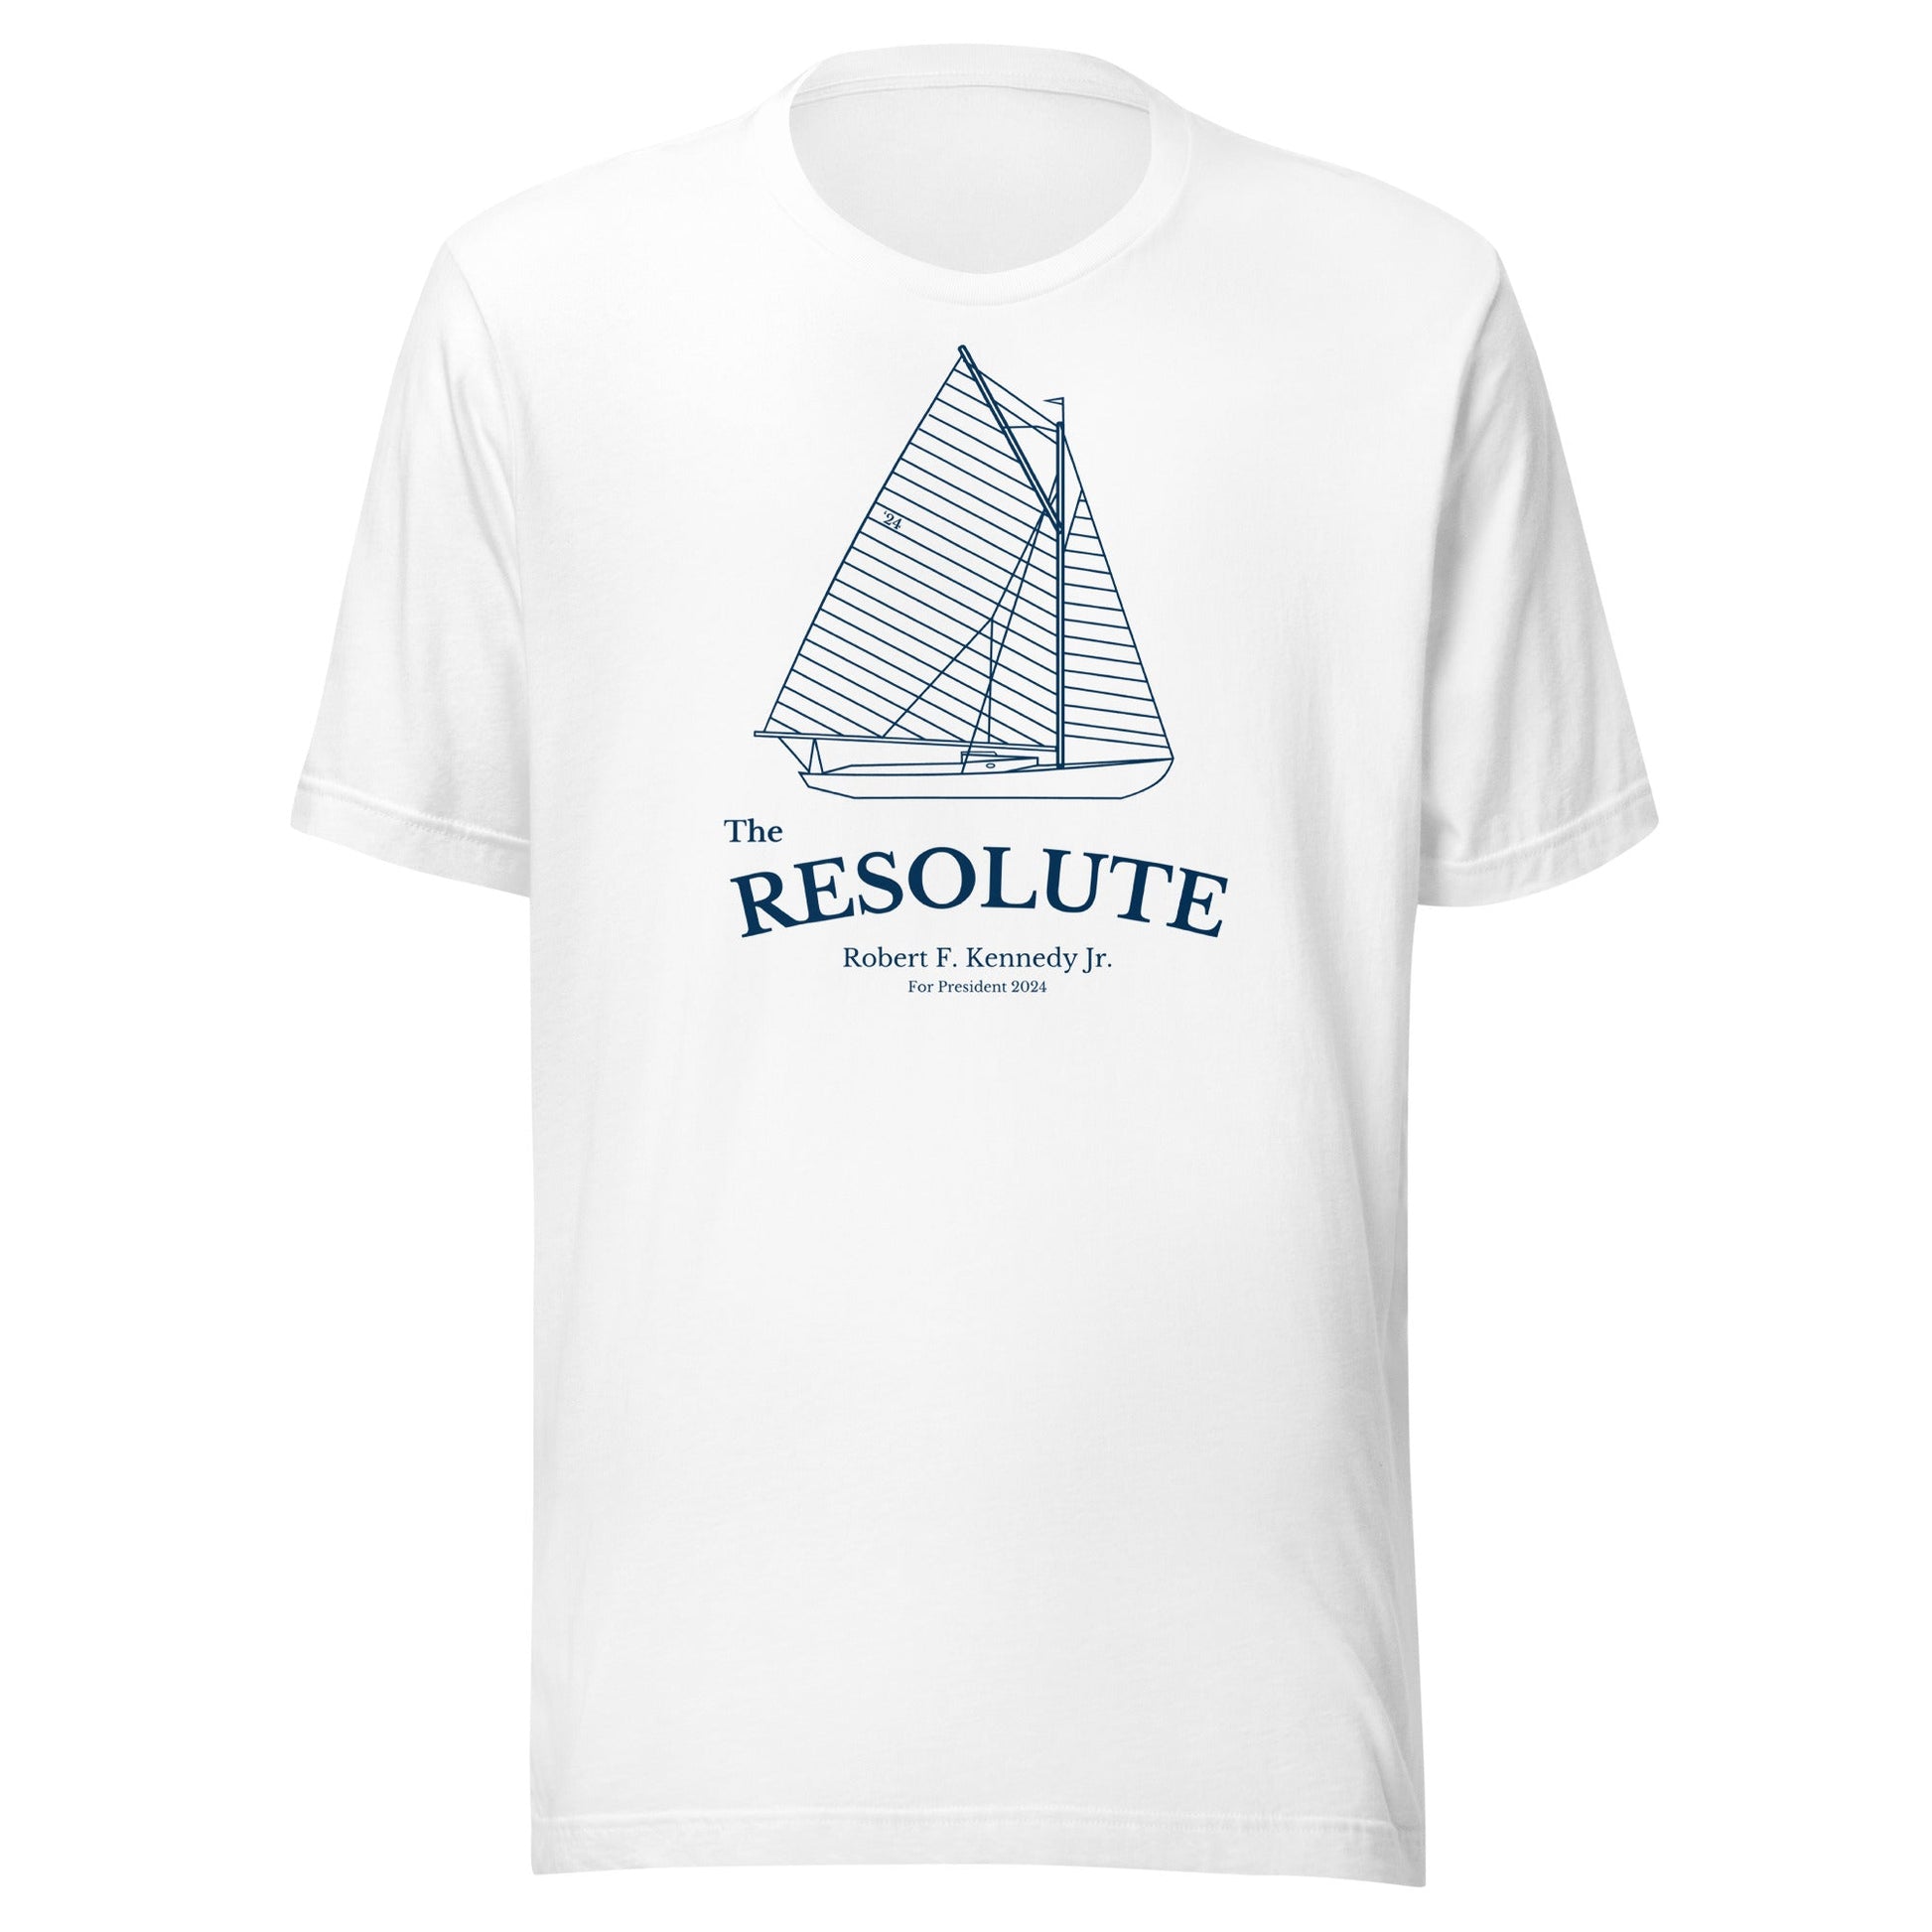 The Resolute Unisex Tee - TEAM KENNEDY. All rights reserved